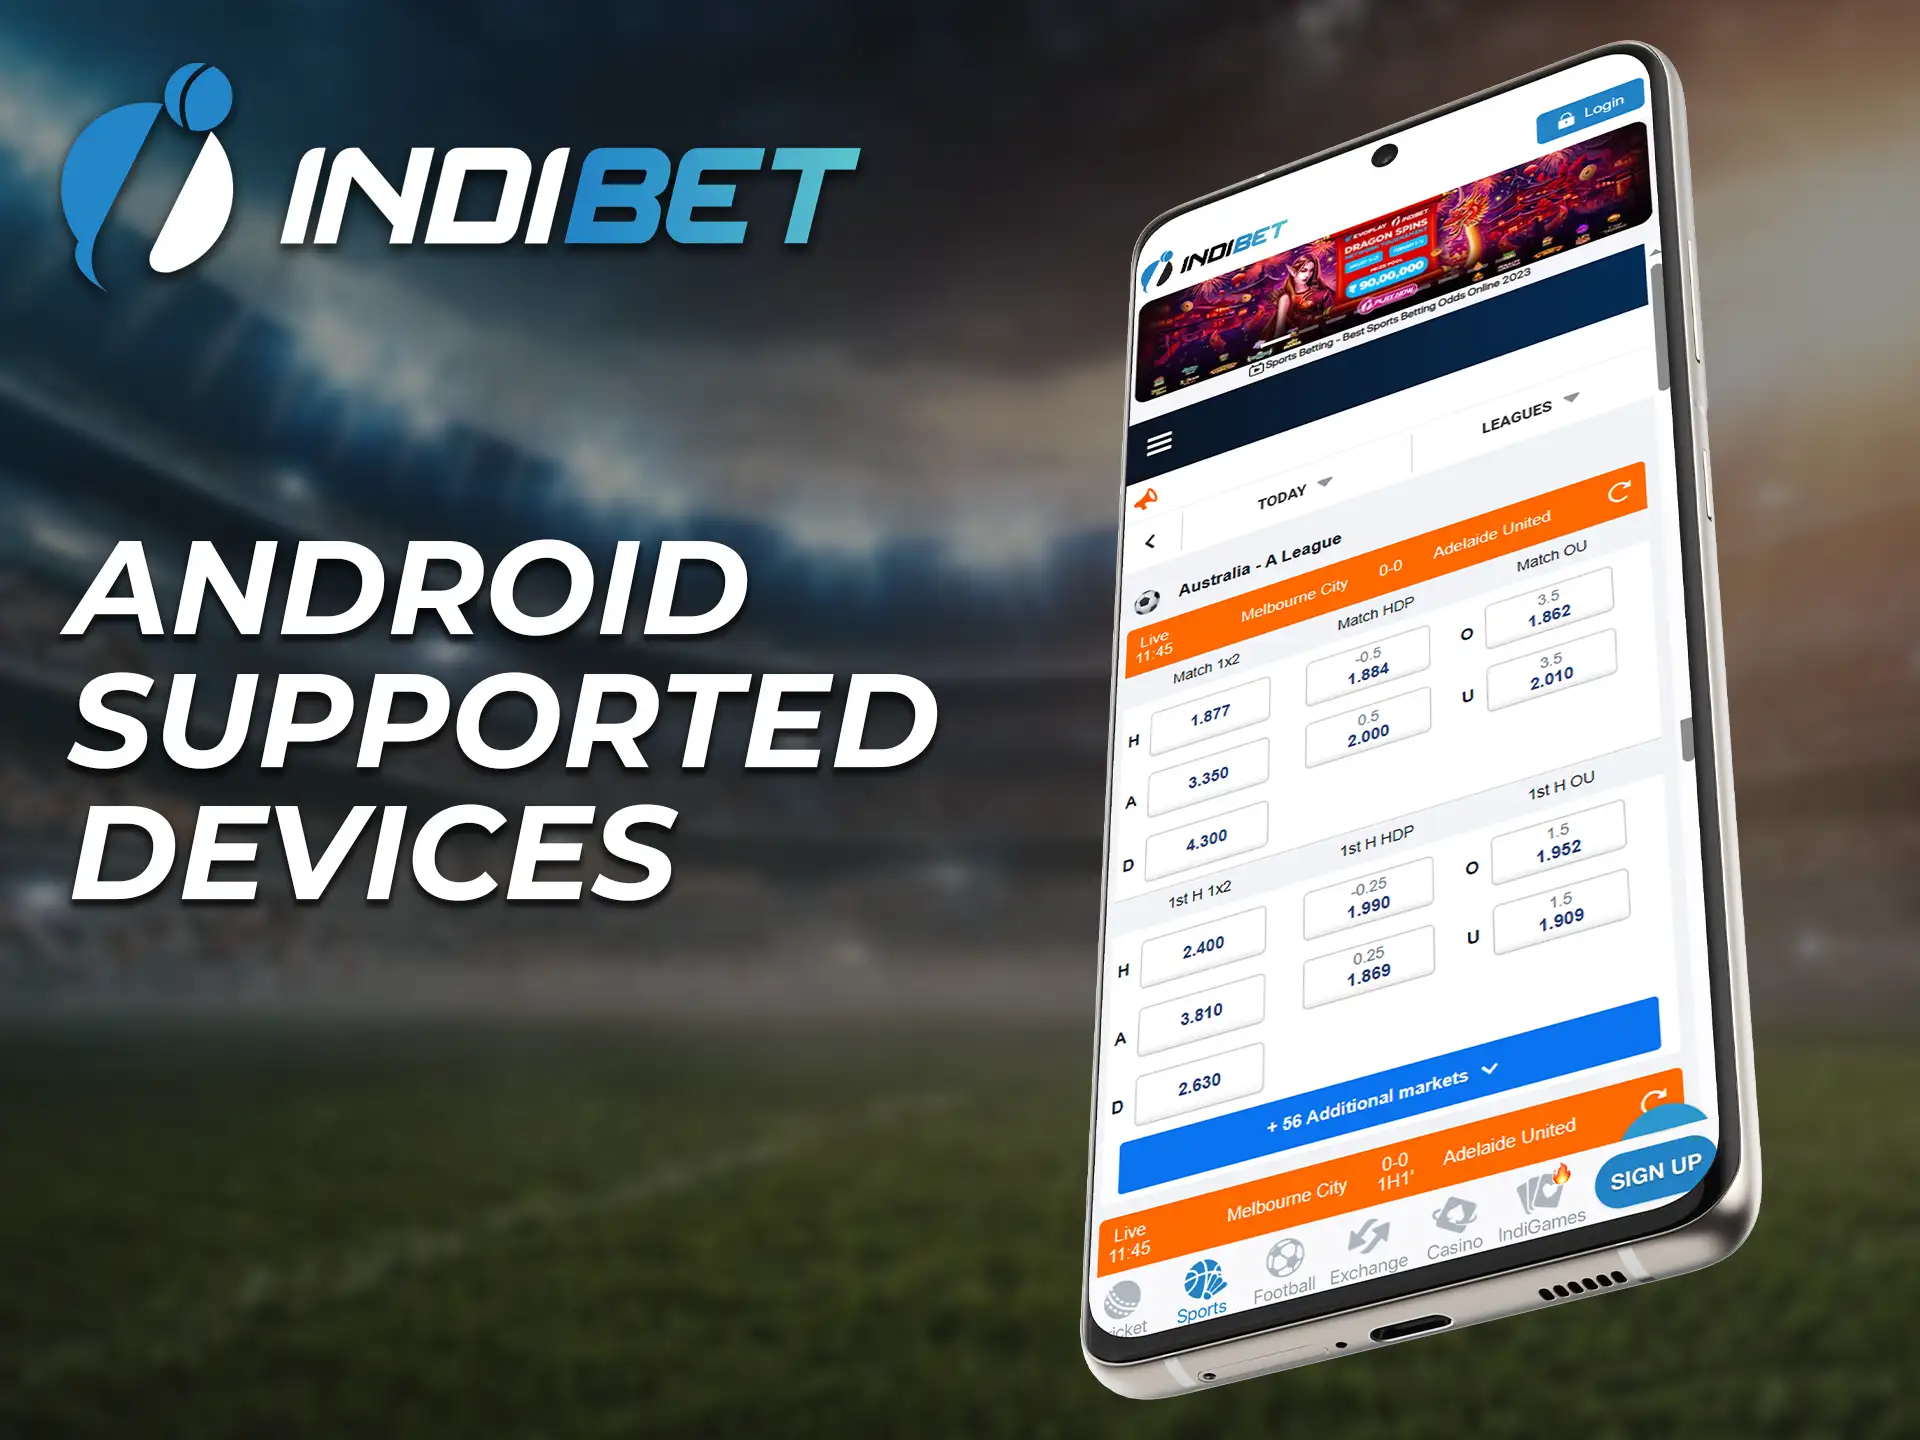 The Indibet app installs on a lot of Android mobile phones without any problems.